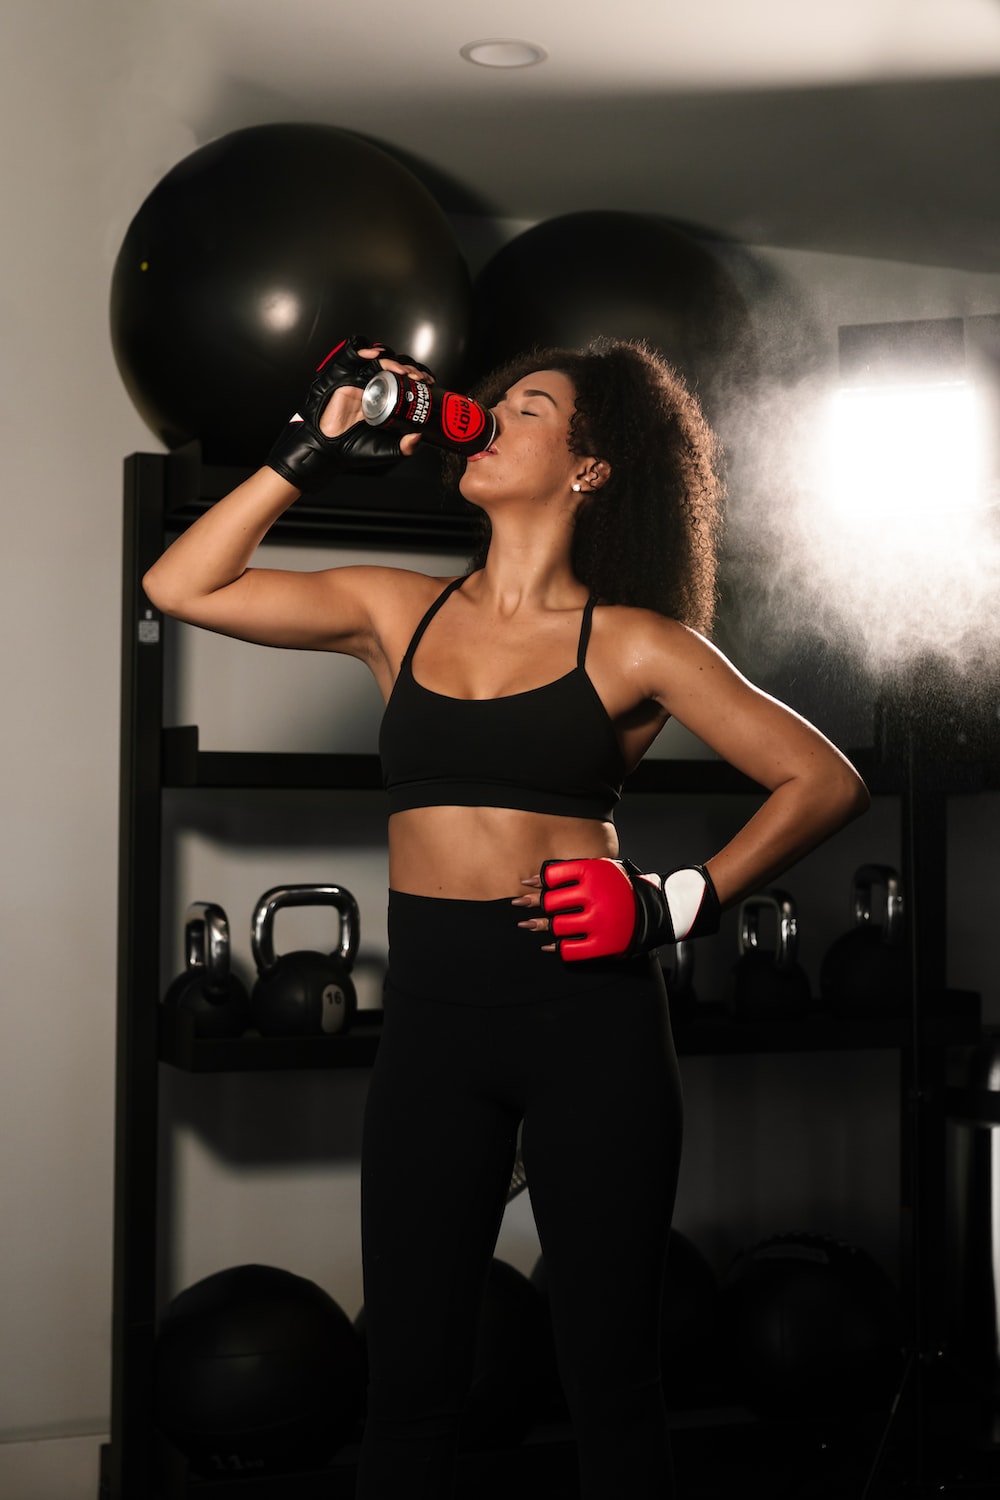 a woman in a sports bra top drinking from a bottle